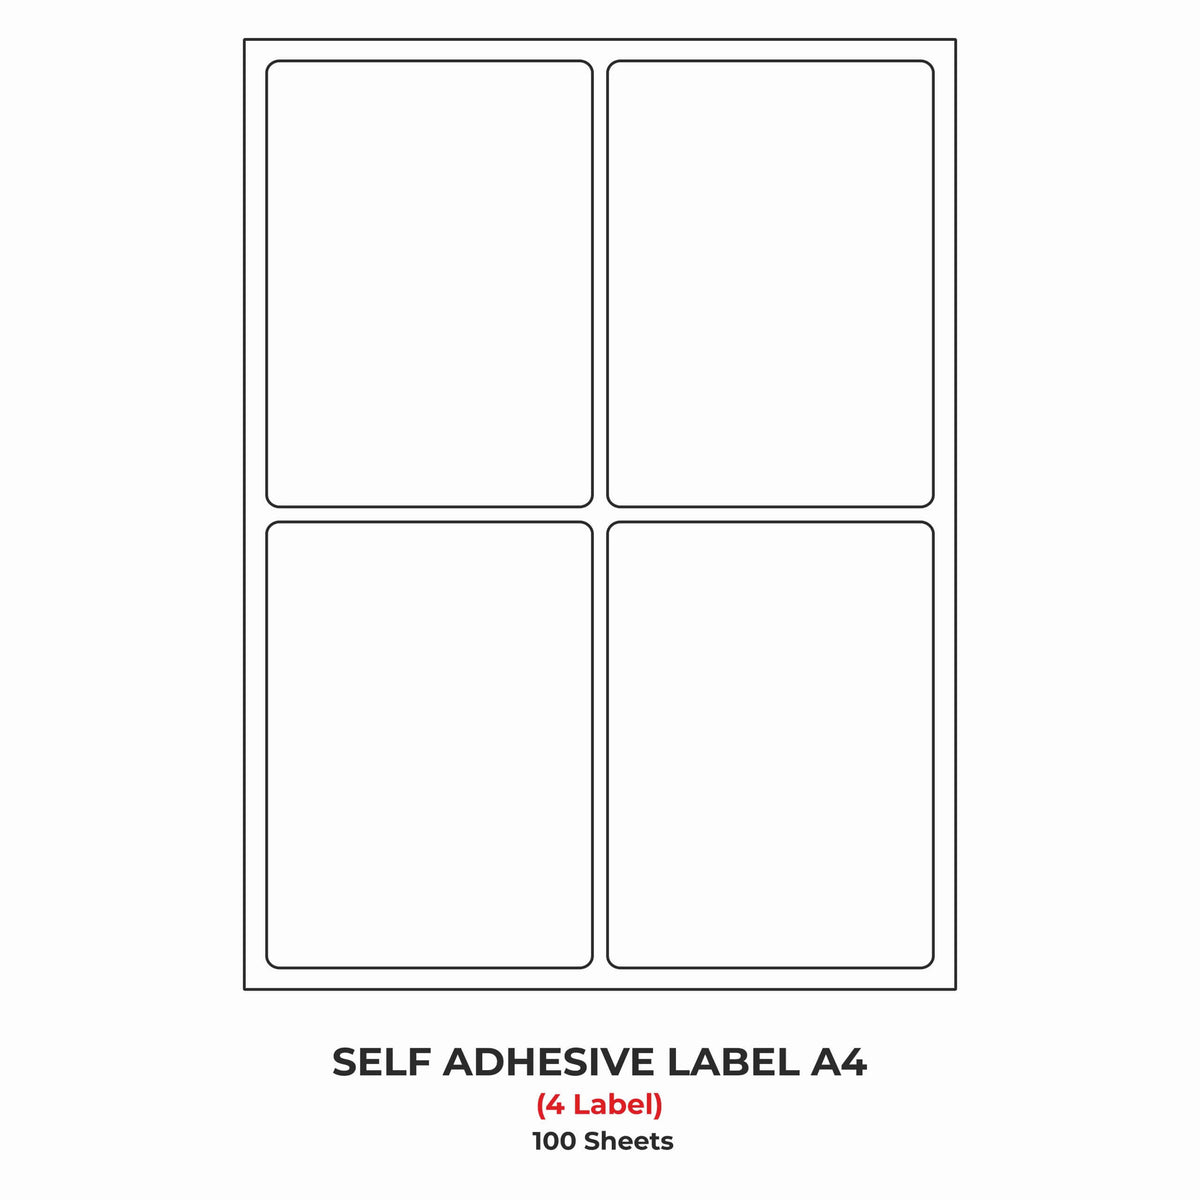 A4 (ST4) Packaging Label (100mm x 140mm x 4) (Self Adhesive Label for Inkjet/Copier/Laser Printer)